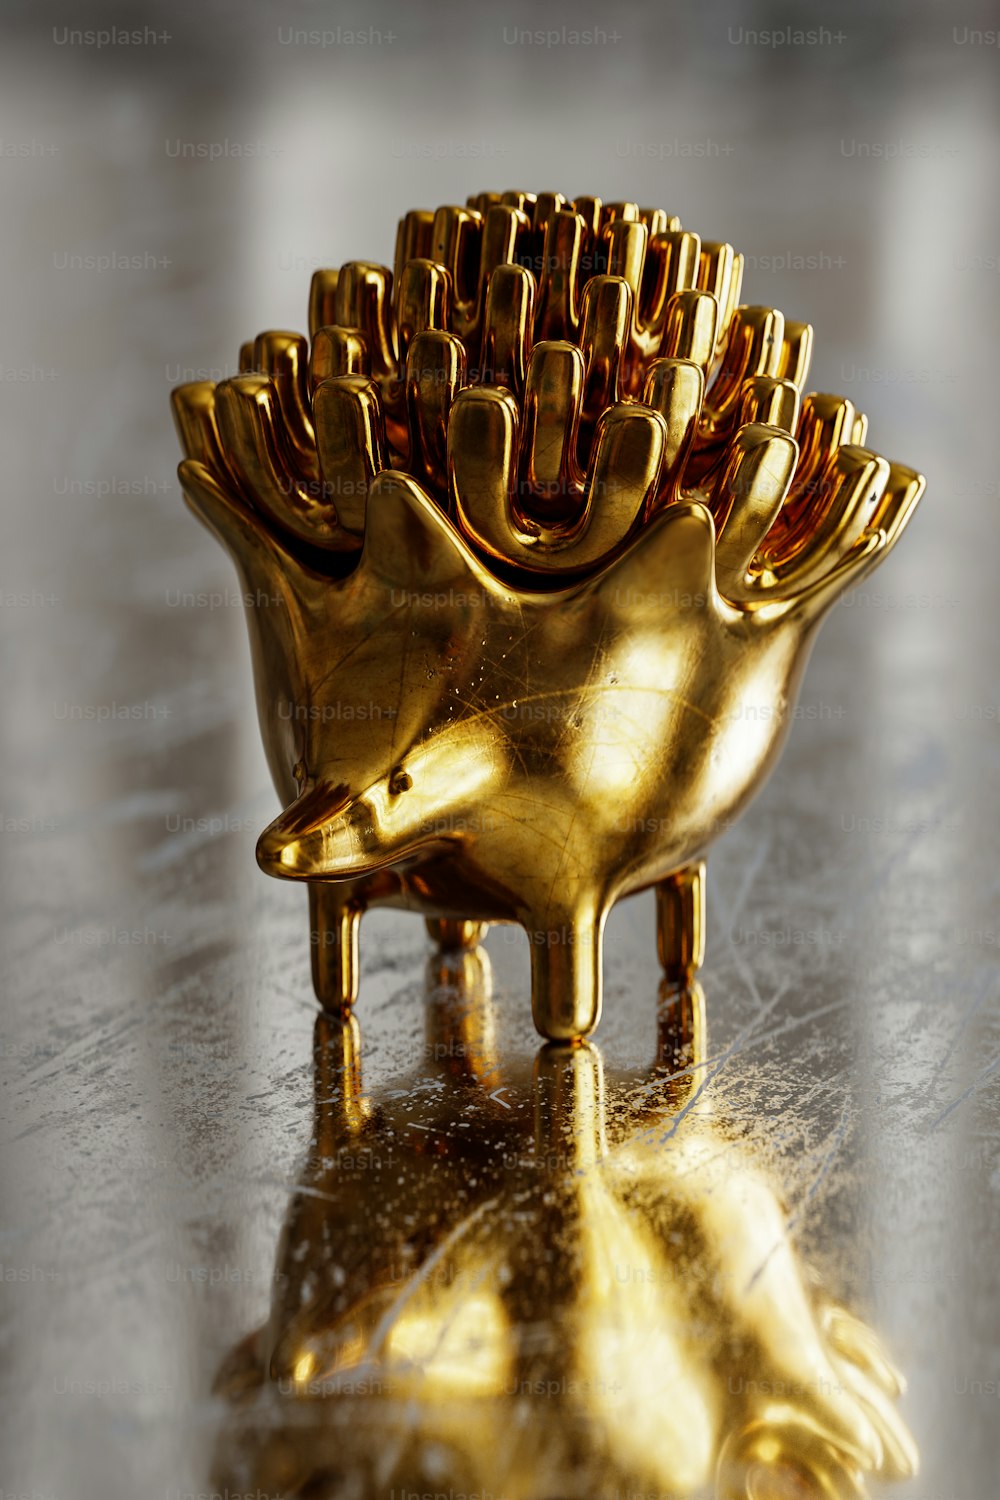 a golden object sitting on top of a shiny surface